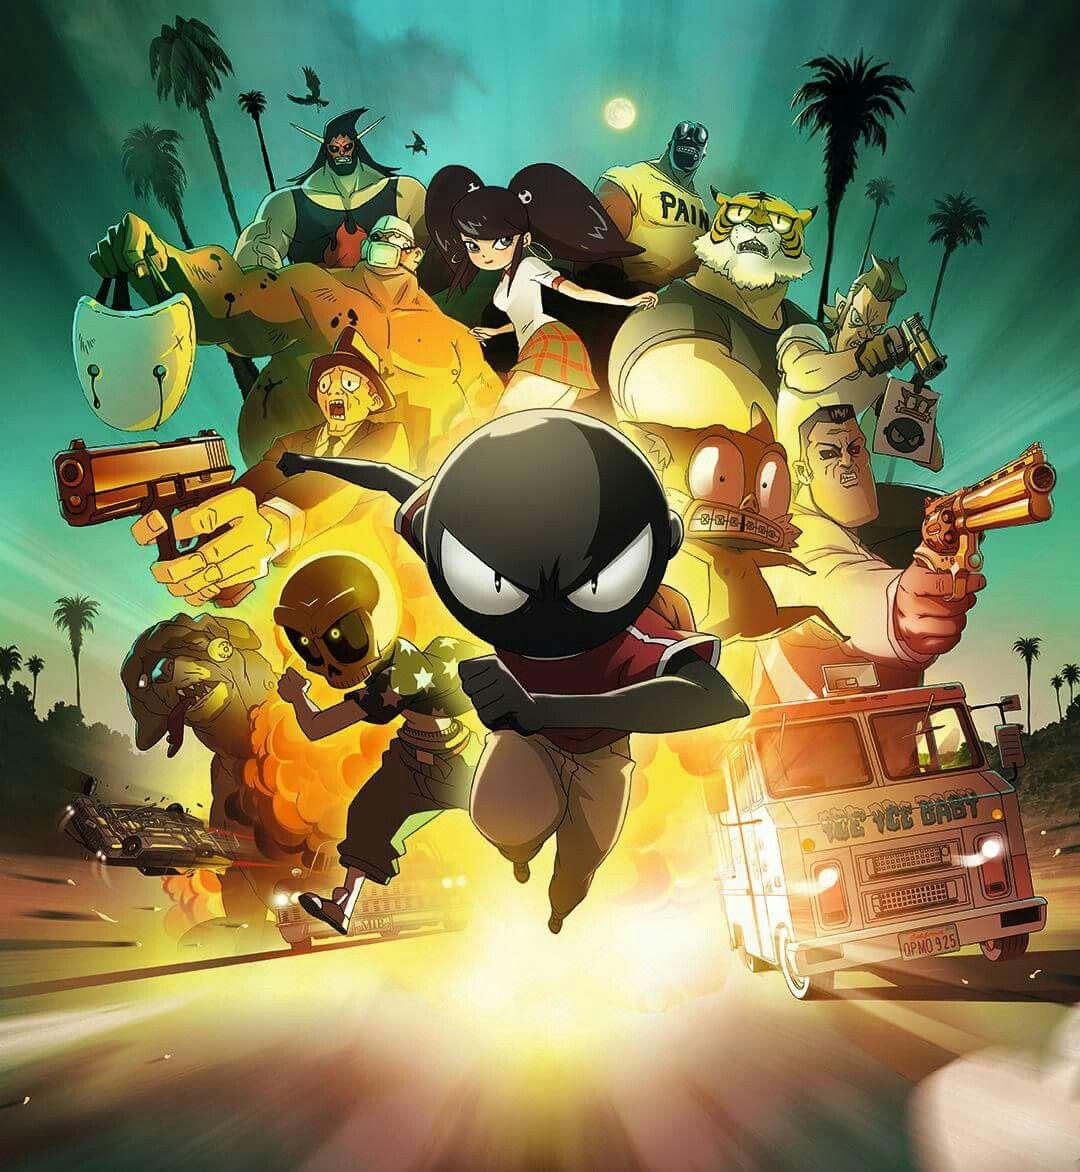 Mutafukaz. Movies online, Streaming movies, Full movies download